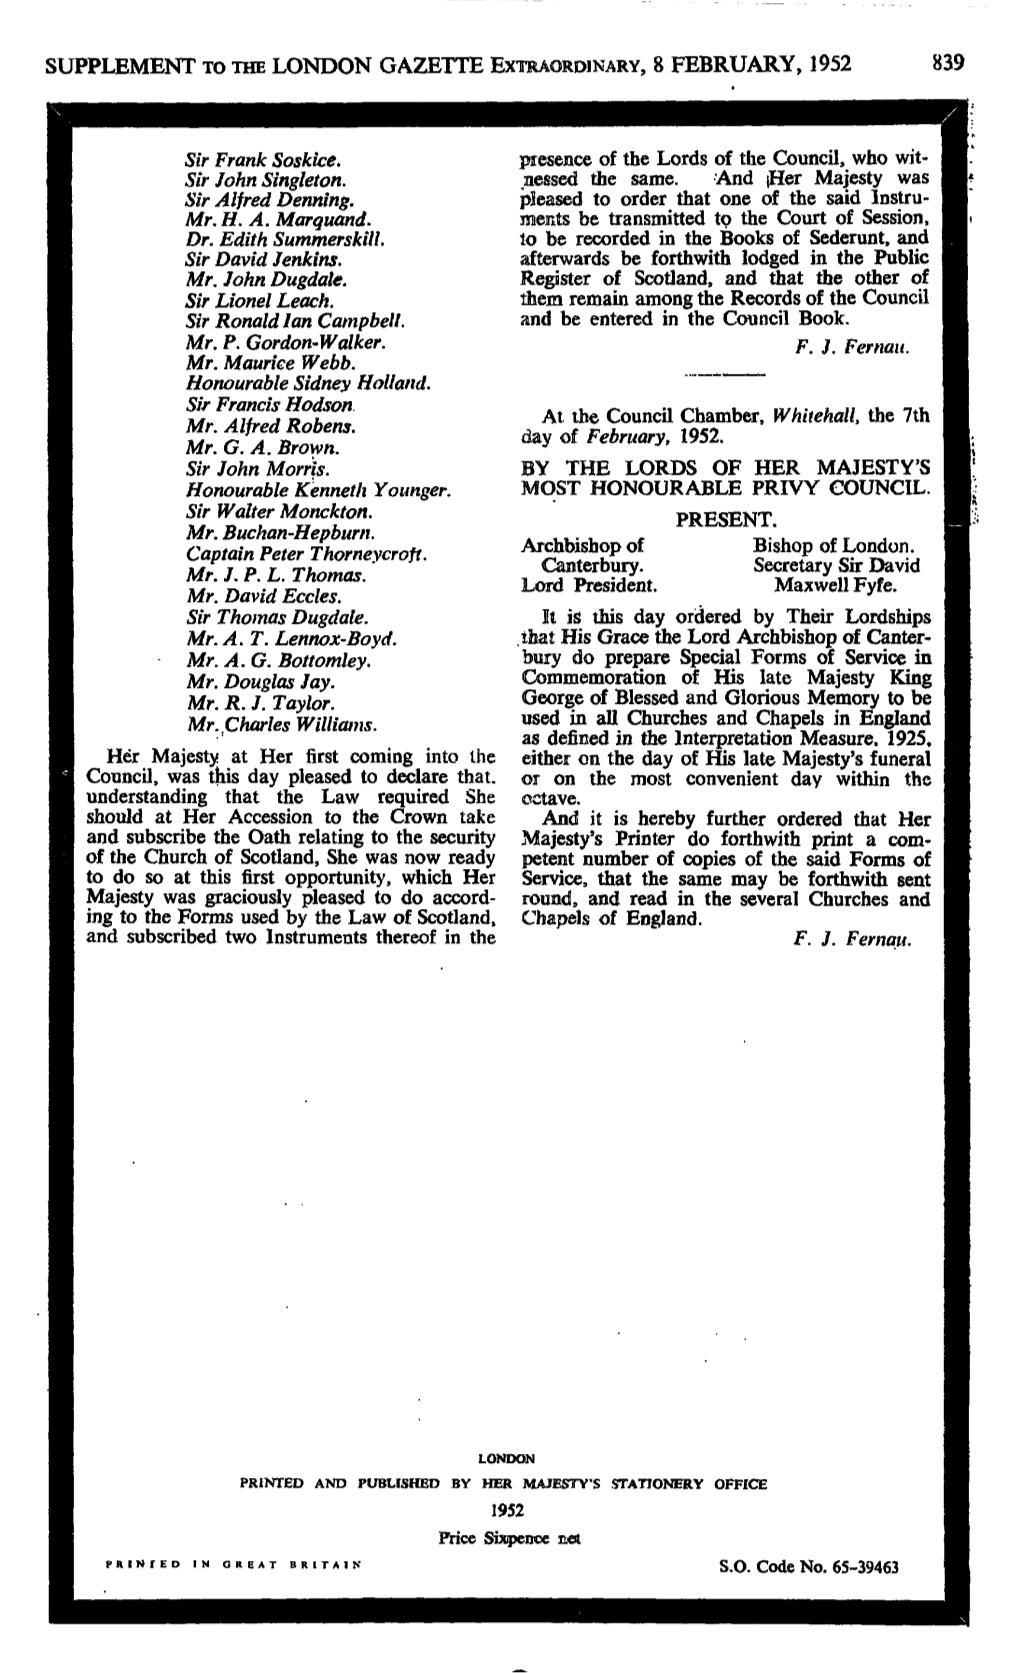 Supplement to the London Gazette Extraordinary, 8 February, 1952 839